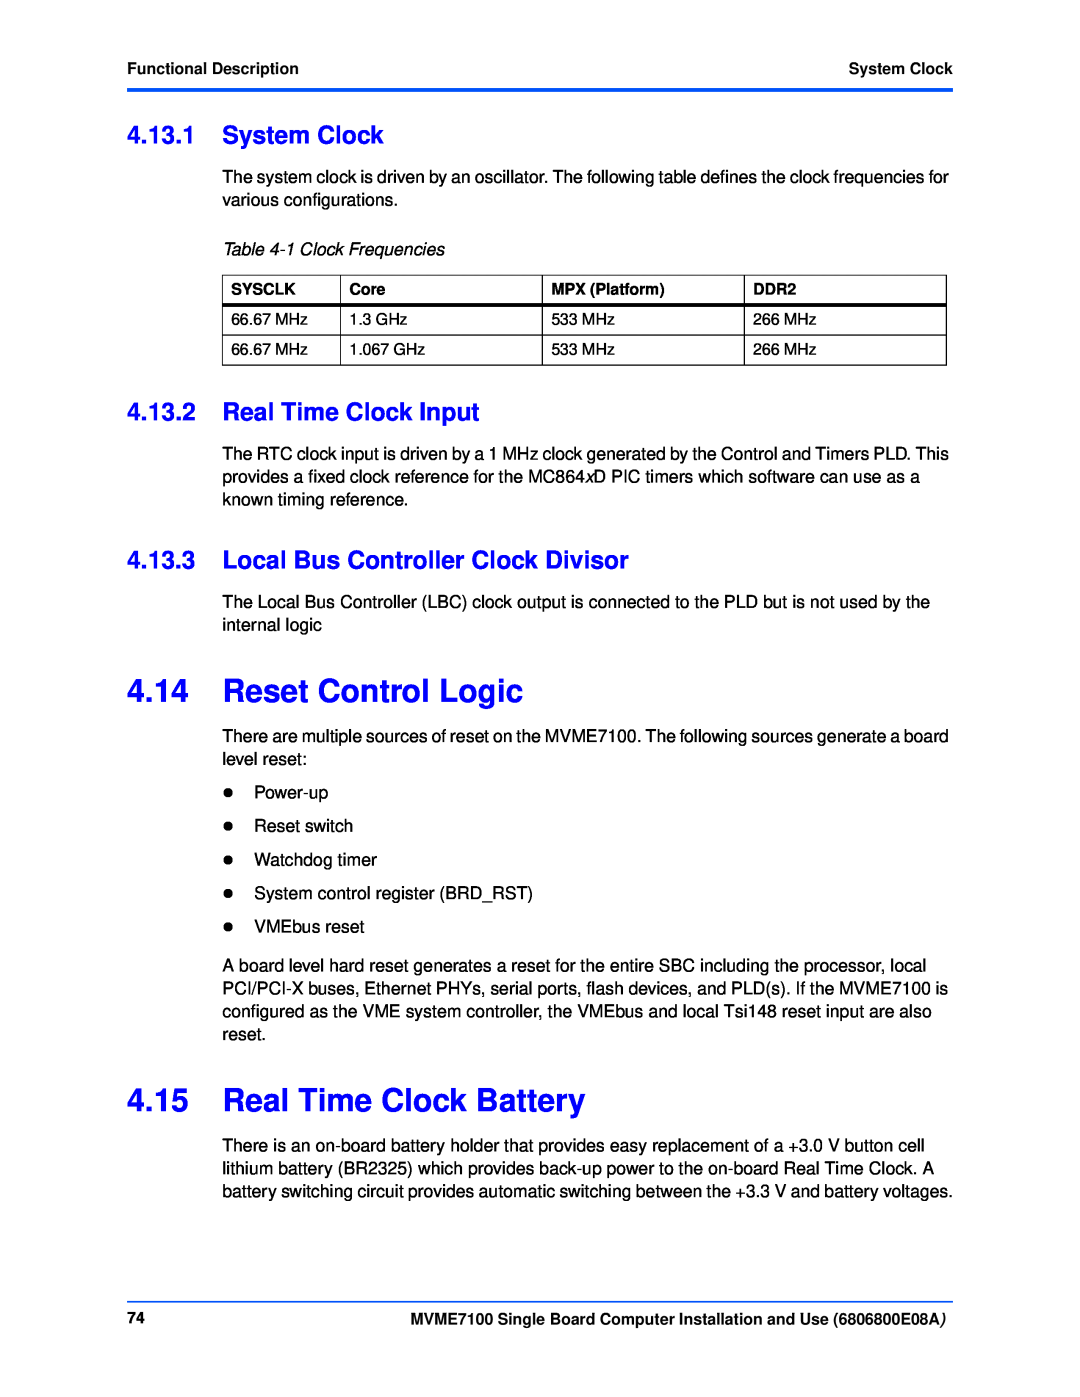 Emerson MVME7100 Reset Control Logic, Real Time Clock Battery, System Clock, Real Time Clock Input, 1 Clock Frequencies 